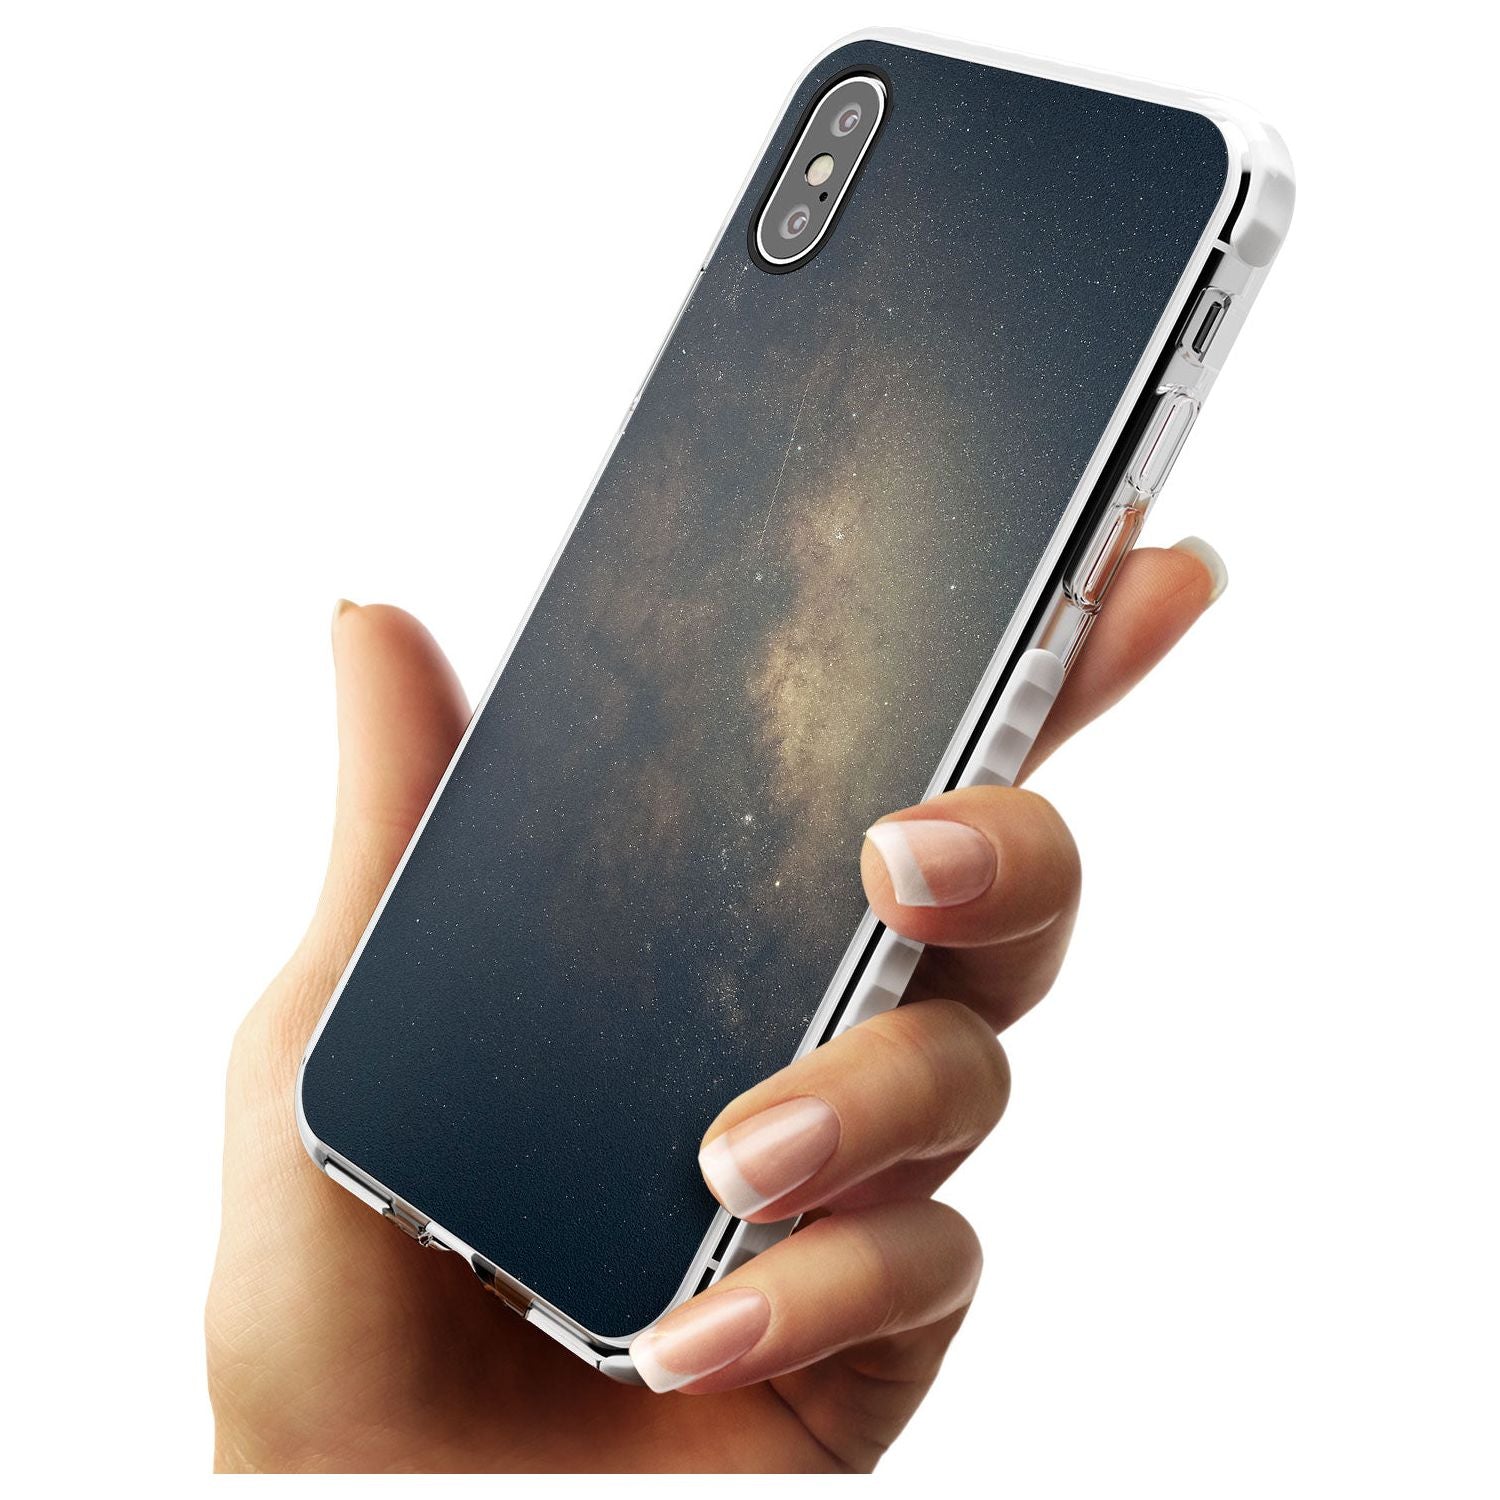 Night Sky Photograph Impact Phone Case for iPhone X XS Max XR